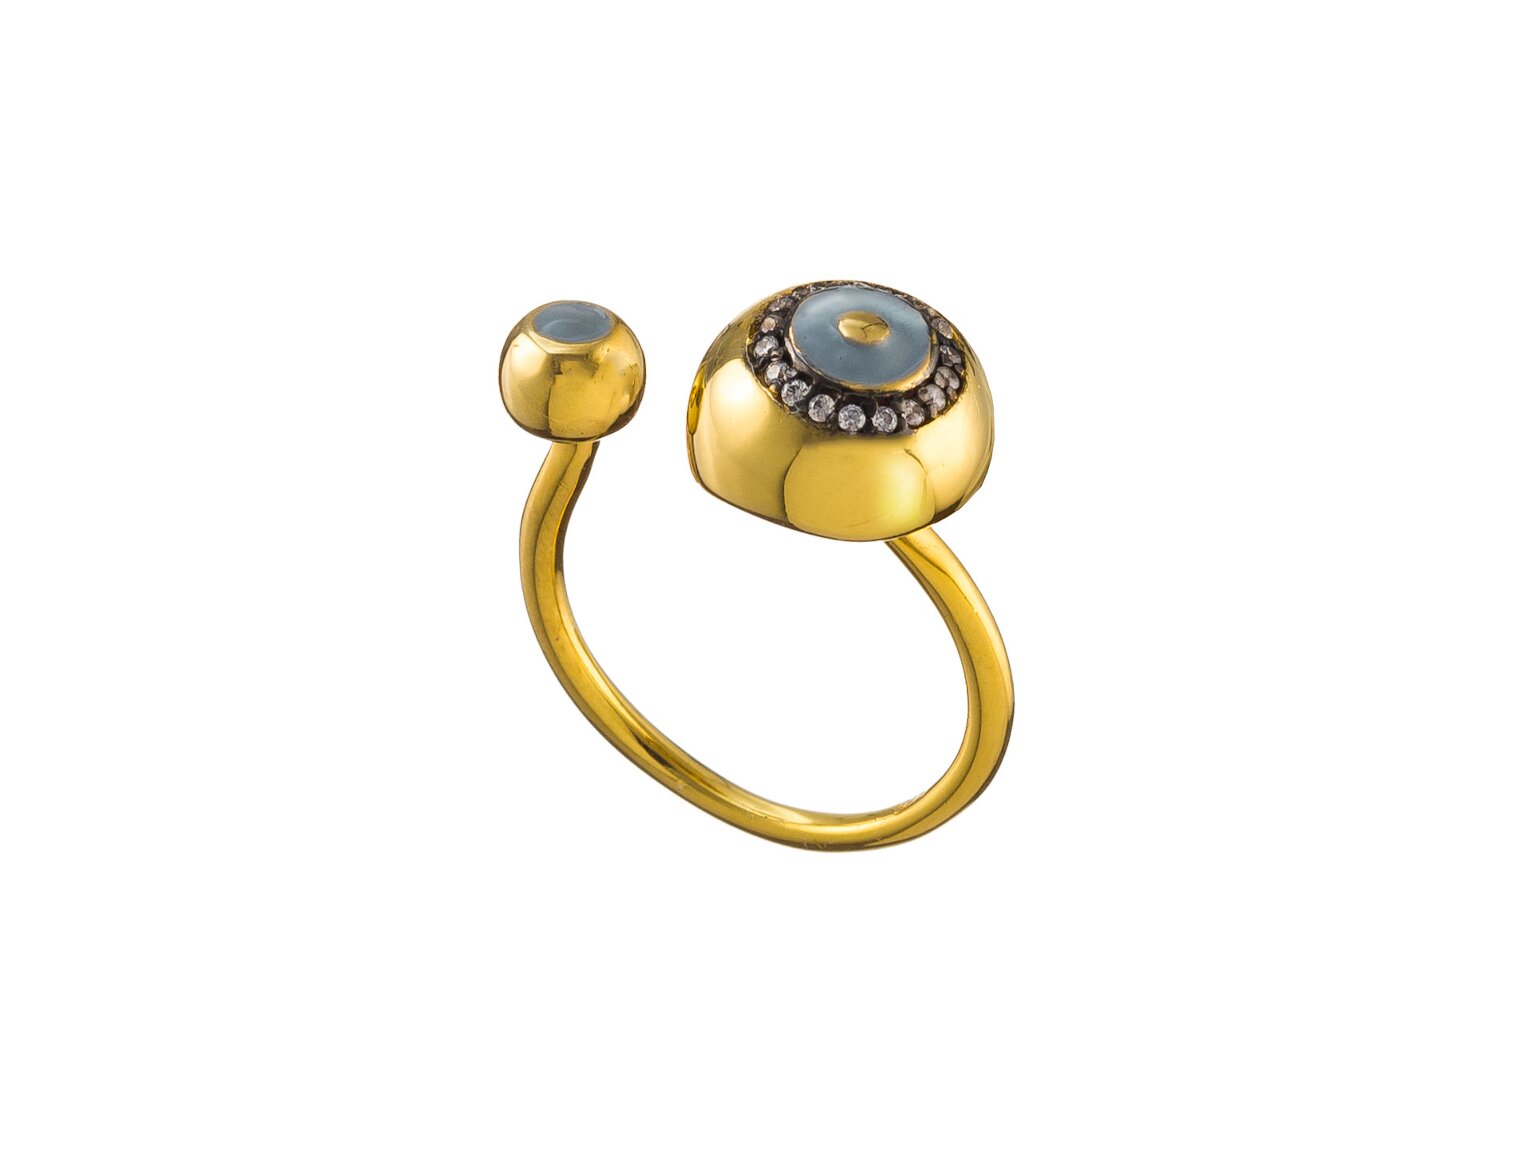 Gold-plated ring with gray eye